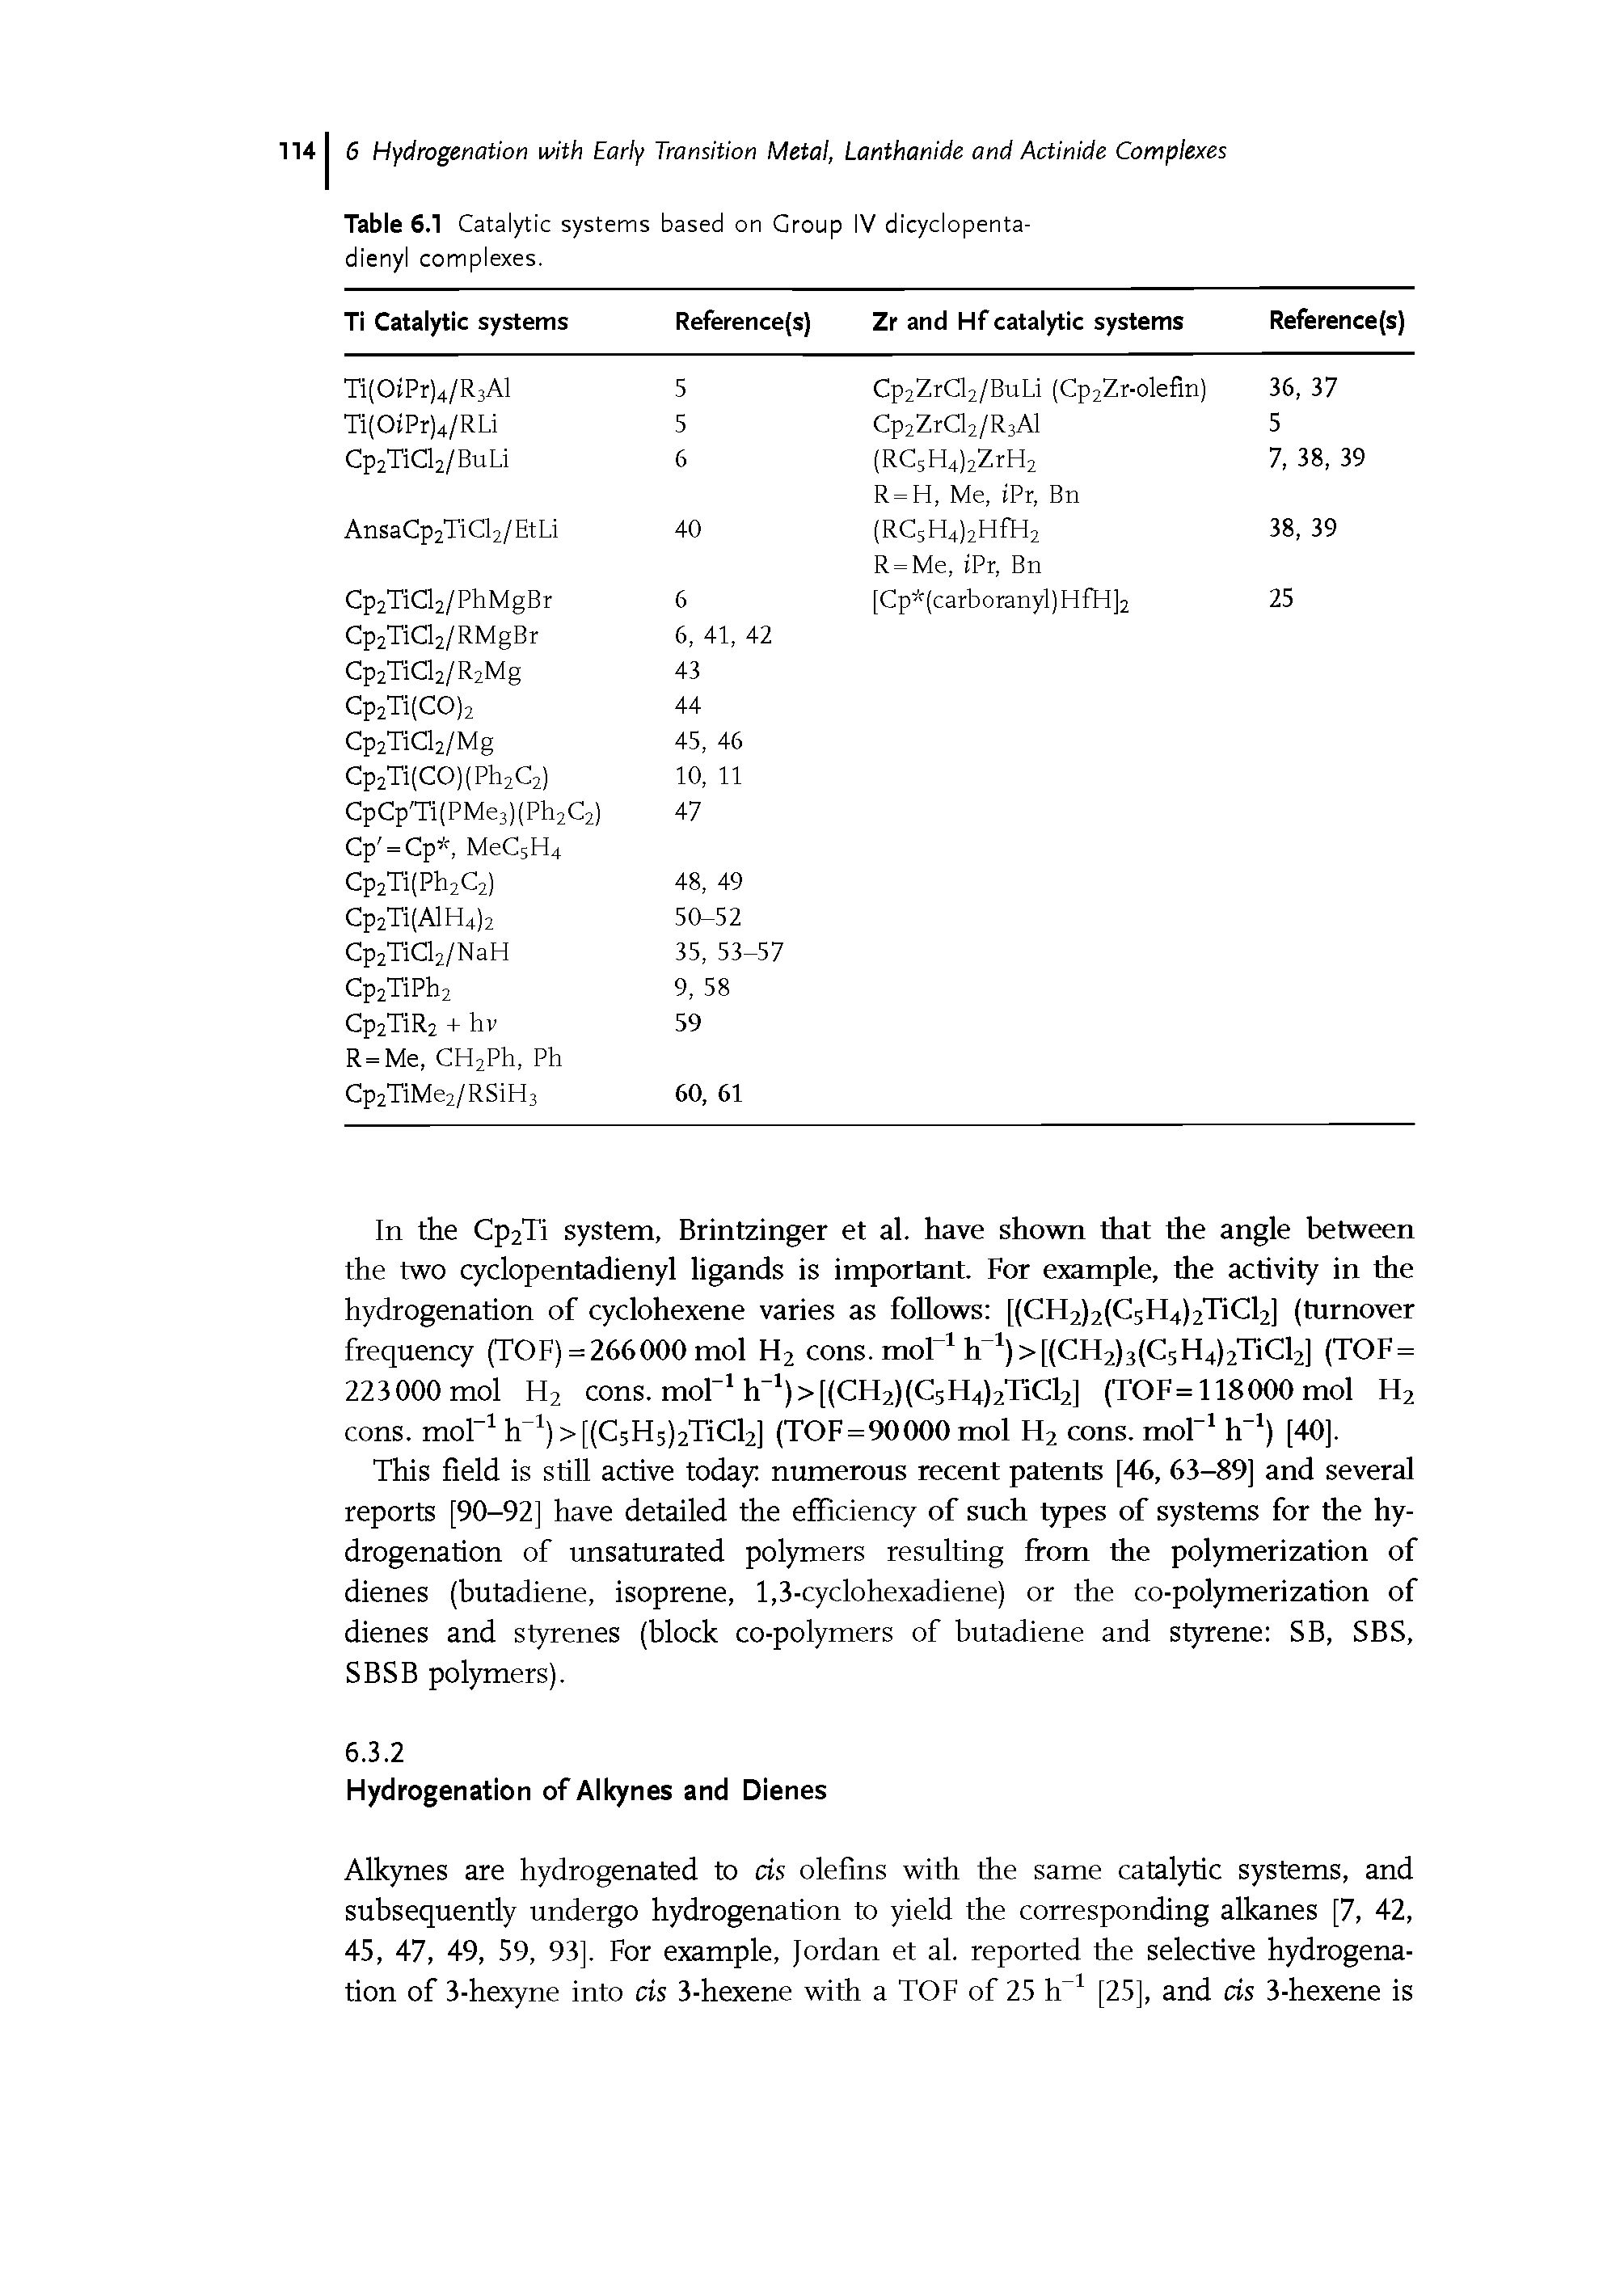 Table 6.1 Catalytic systems based on Group IV dicyclopenta-dienyl complexes.